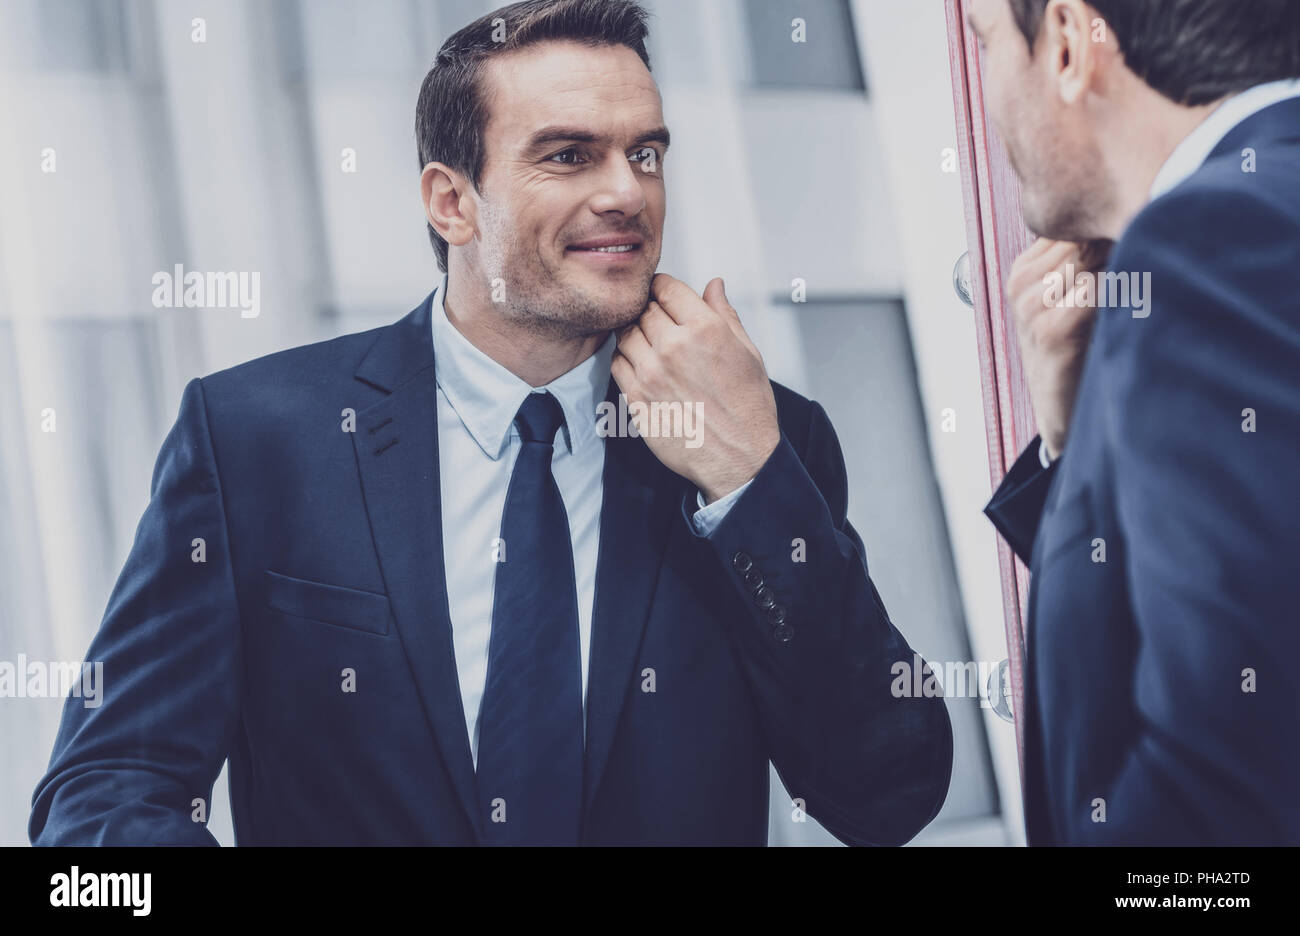 Charismatic entrepreneur looking at himself in the mirror Stock Photo